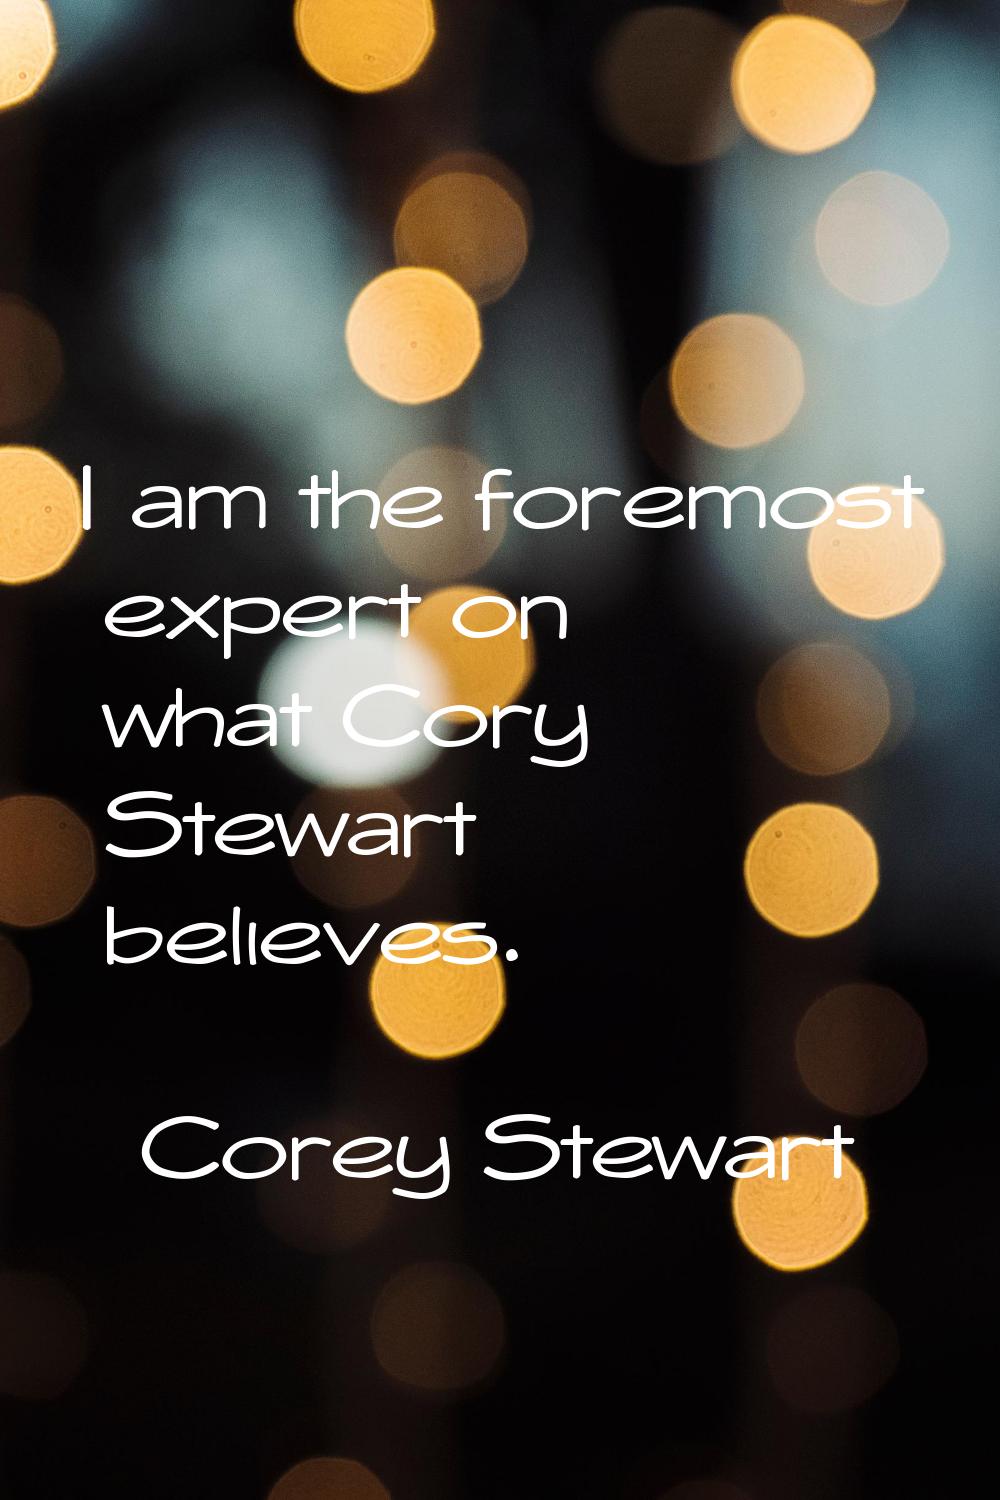 I am the foremost expert on what Cory Stewart believes.